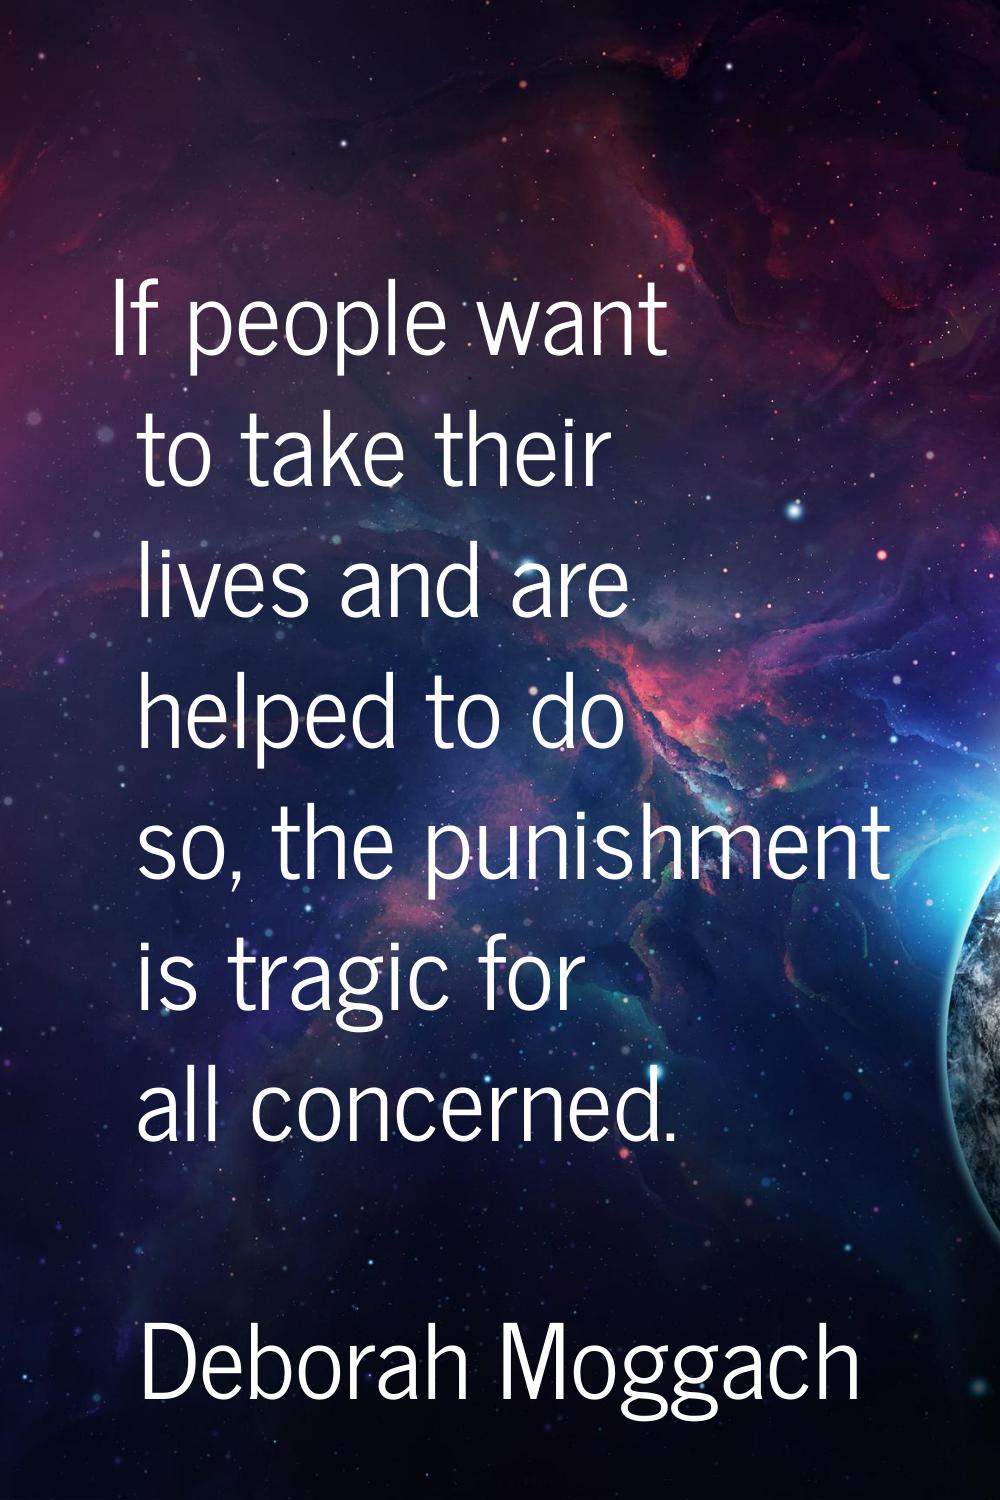 If people want to take their lives and are helped to do so, the punishment is tragic for all concer